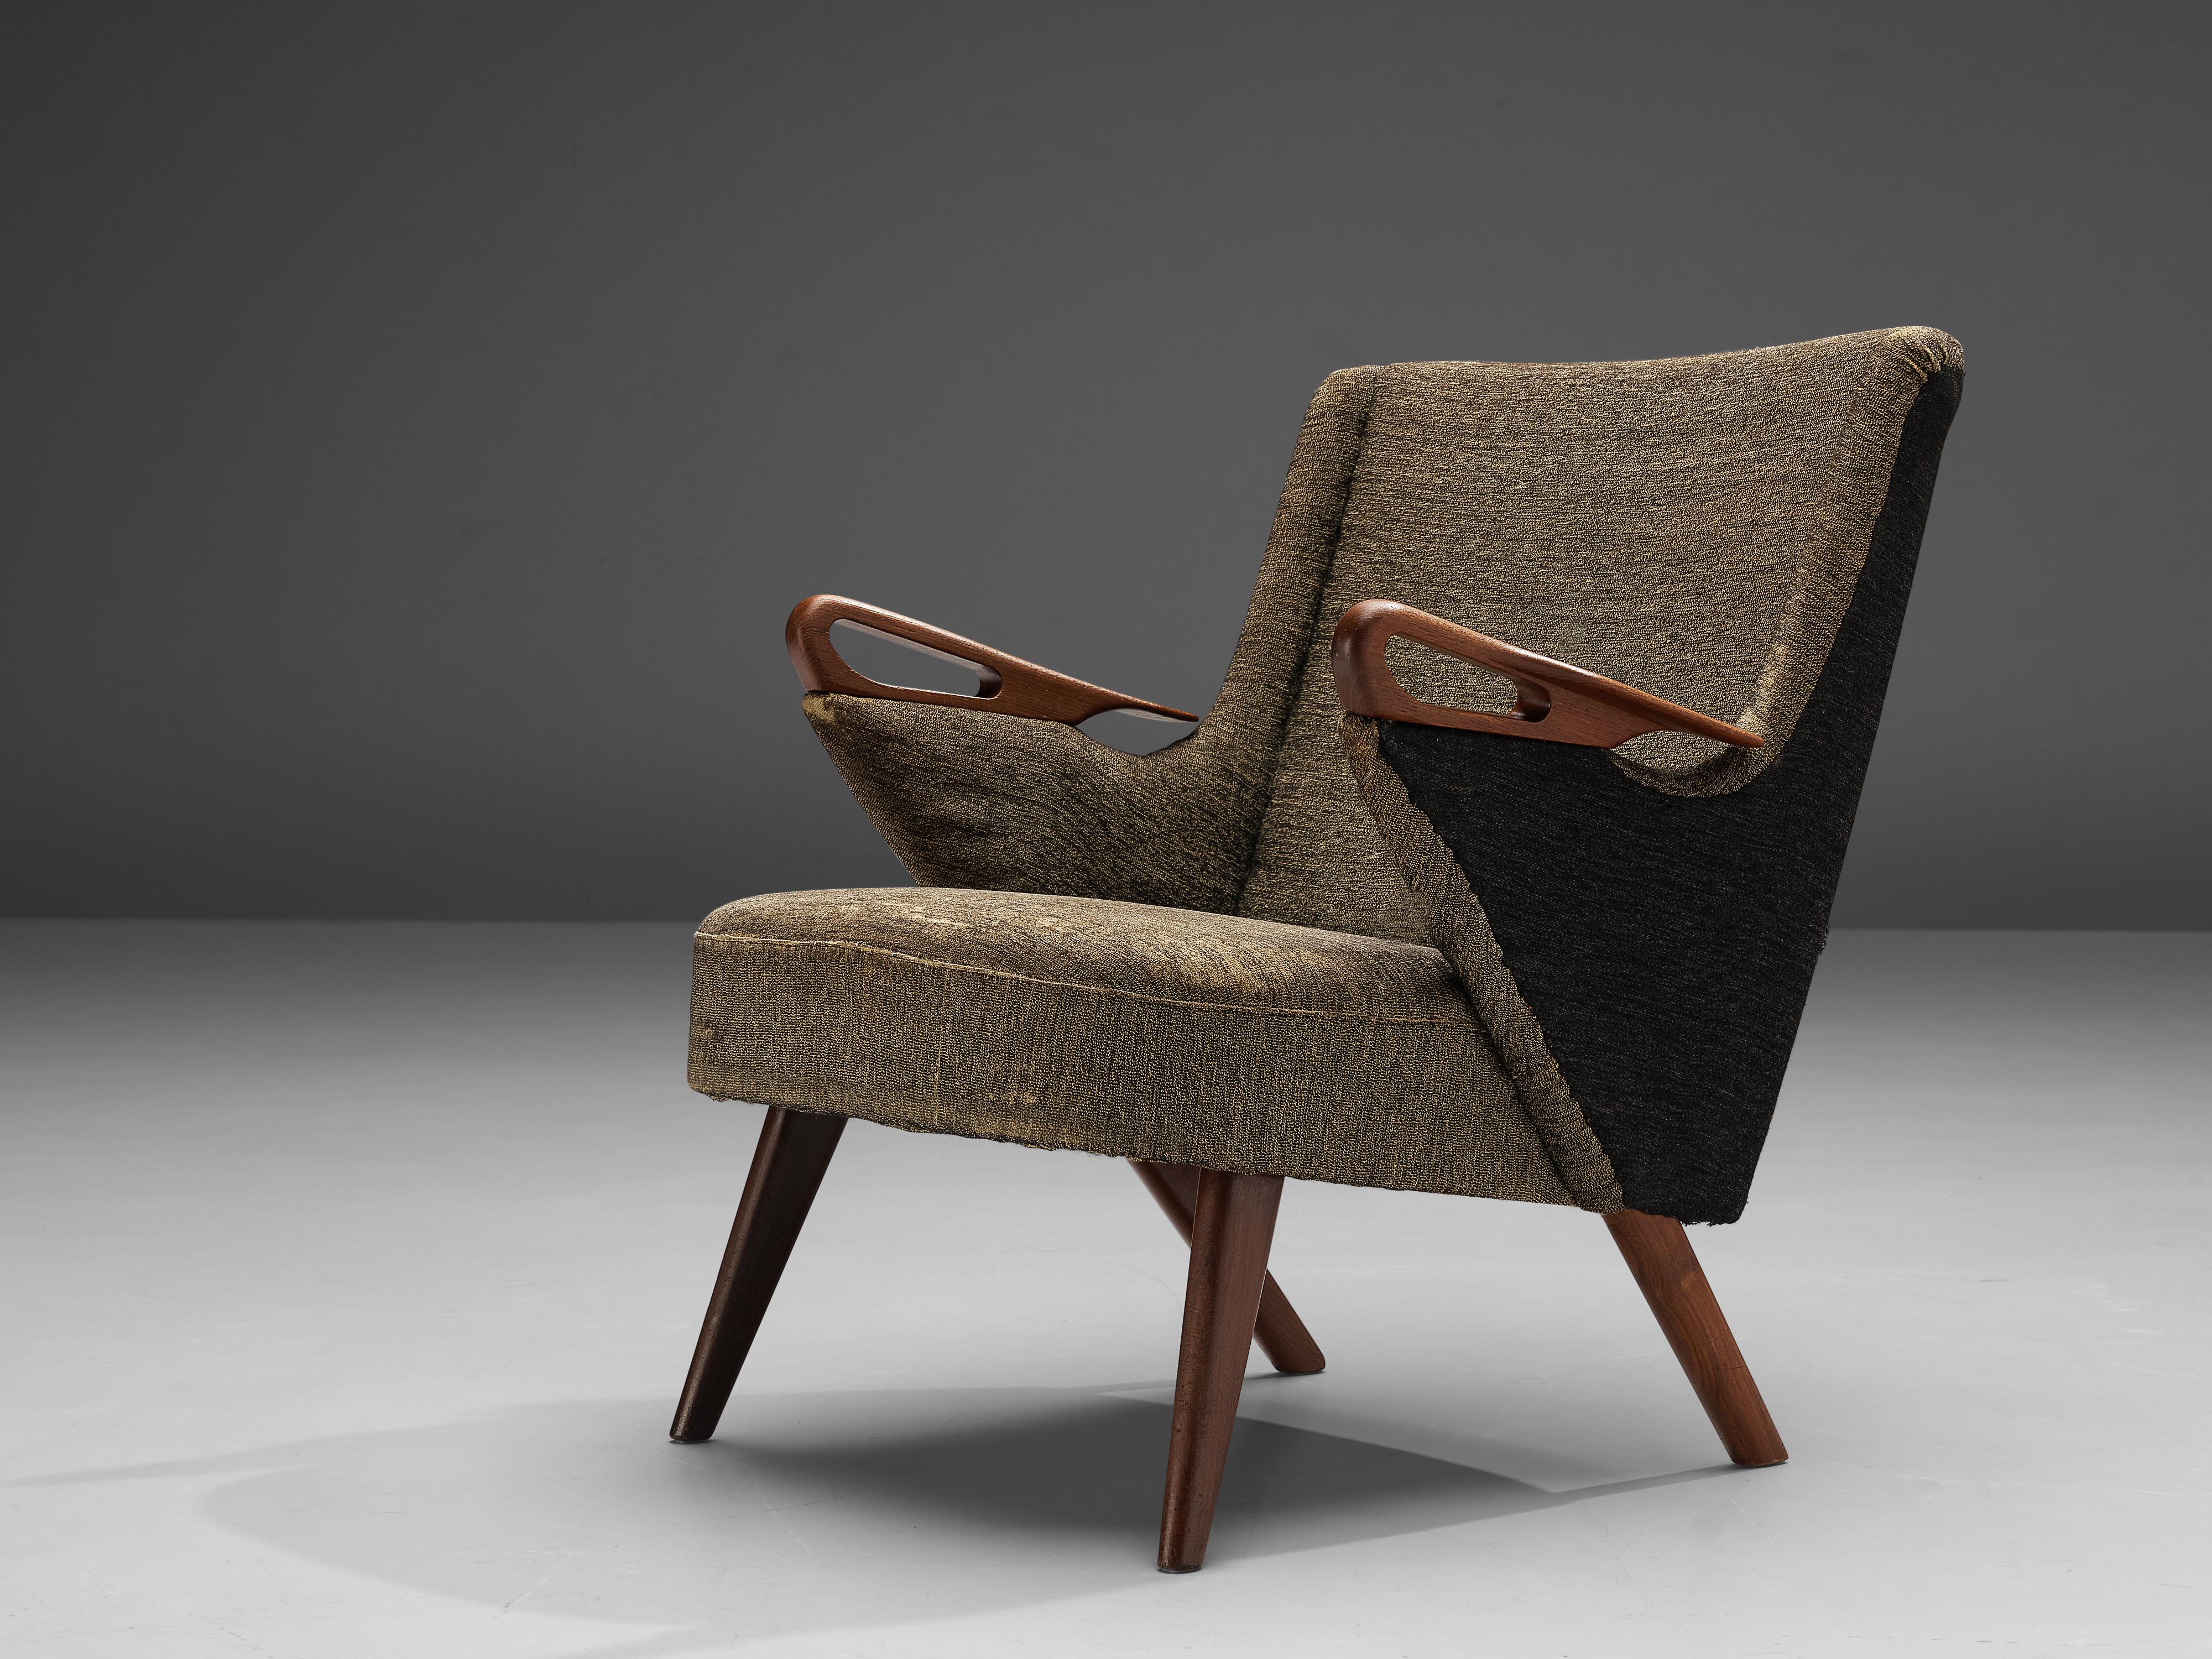 Chresten Findahl Brodersen, lounge chair, teak, fabric upholstery, Denmark, 1950s

Danish lounge chair in green upholstery. Wonderful details are the sculpted armrests in teak wood. This detail visually connects with the legs in teak wood. Due to